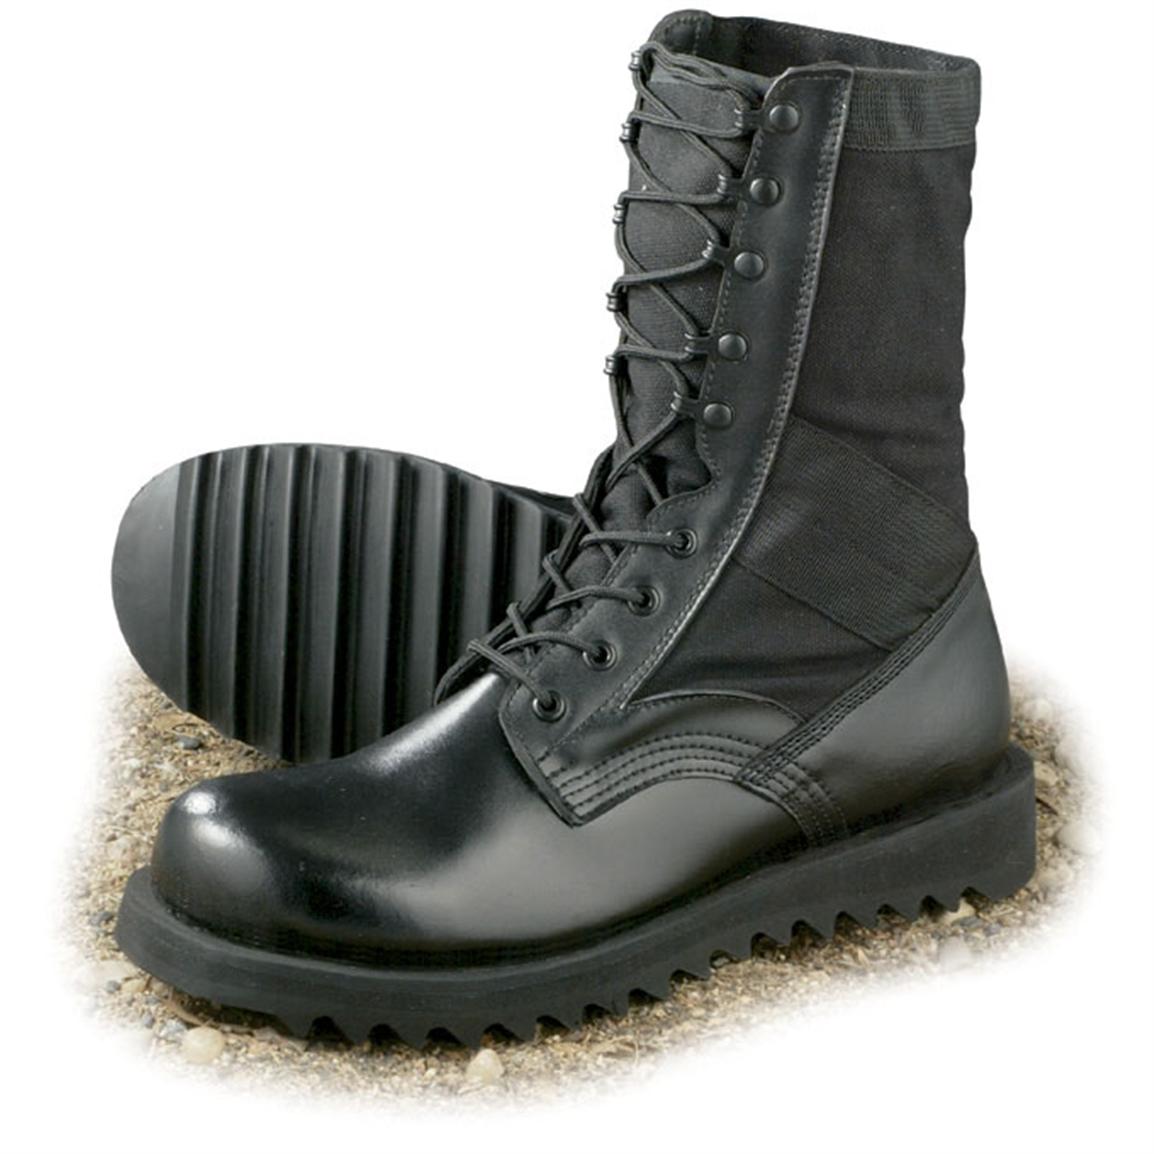 Mil. spec. U.S. style Ripple Sole Jungle Boots, Black 79170, Combat & Tactical Boots at